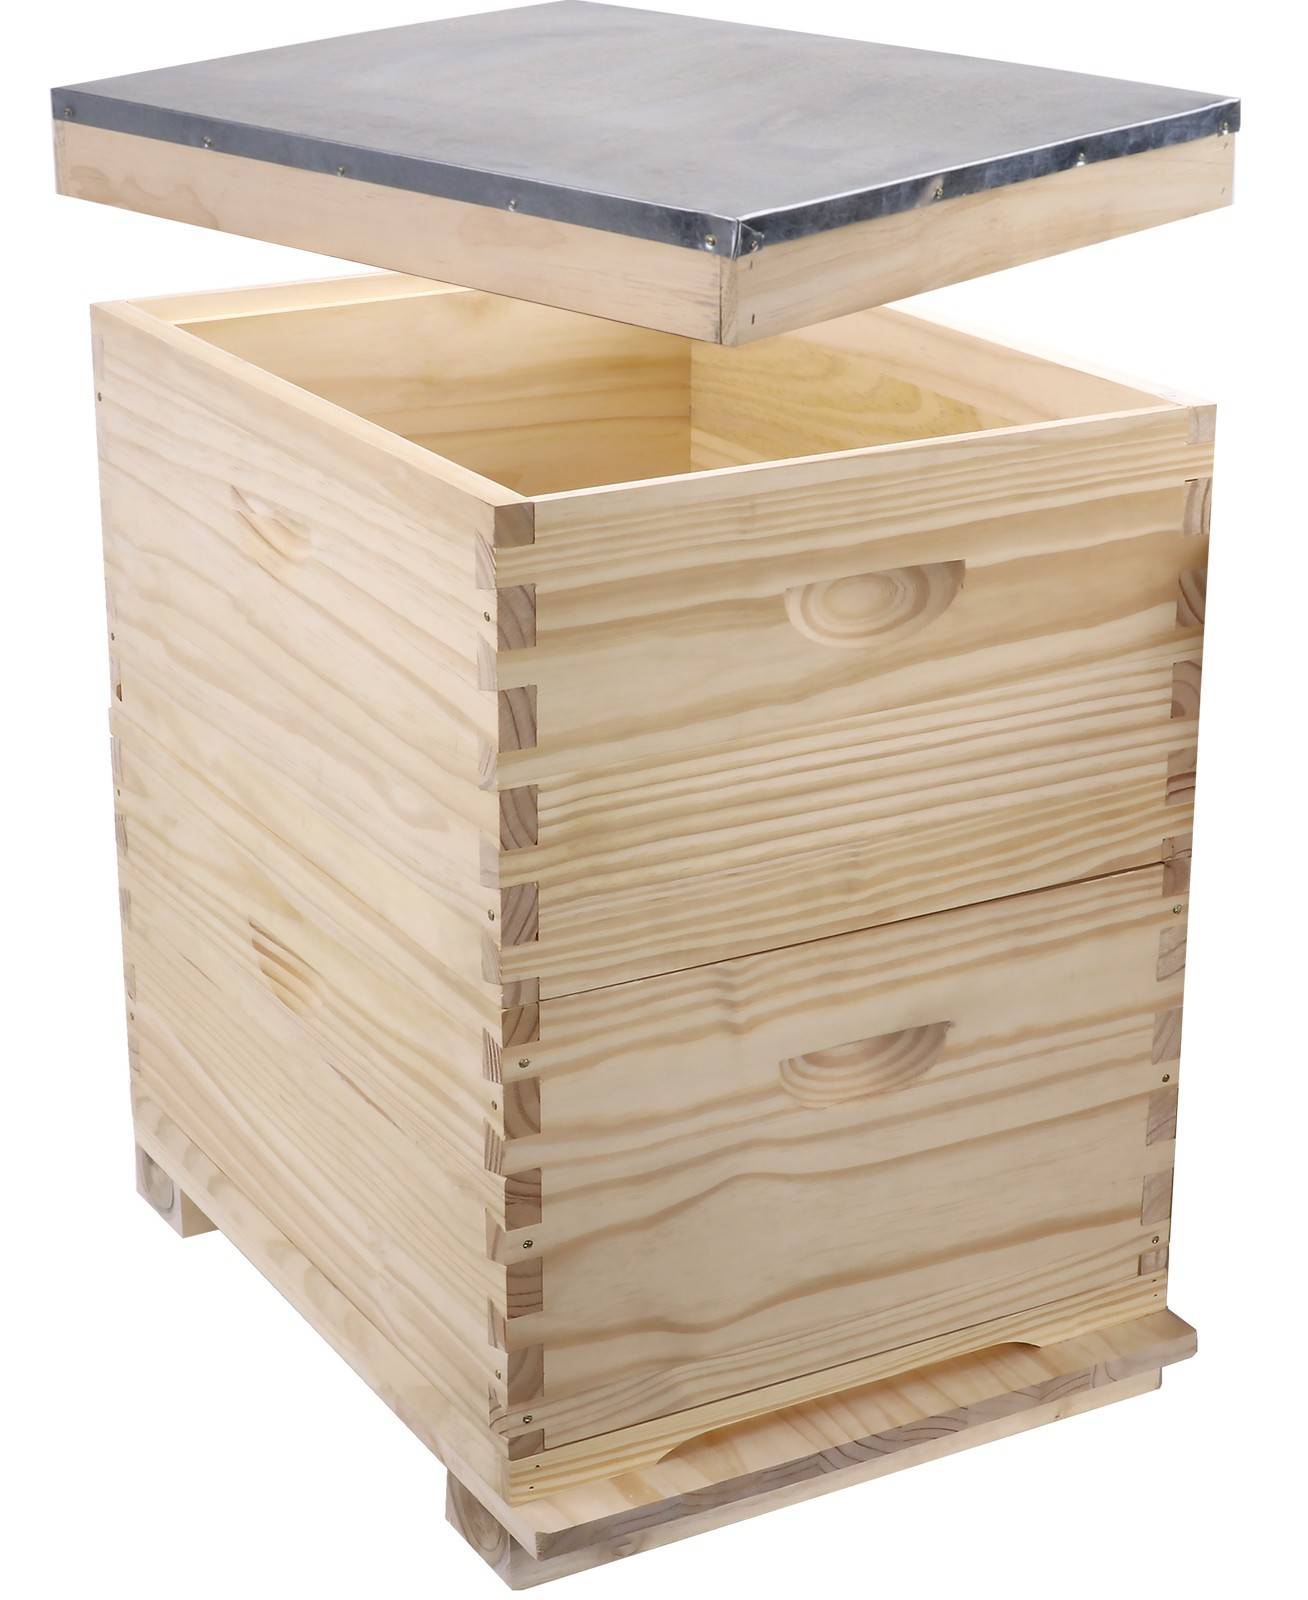 Double Level Timber Beehive 8 Frame No Frames